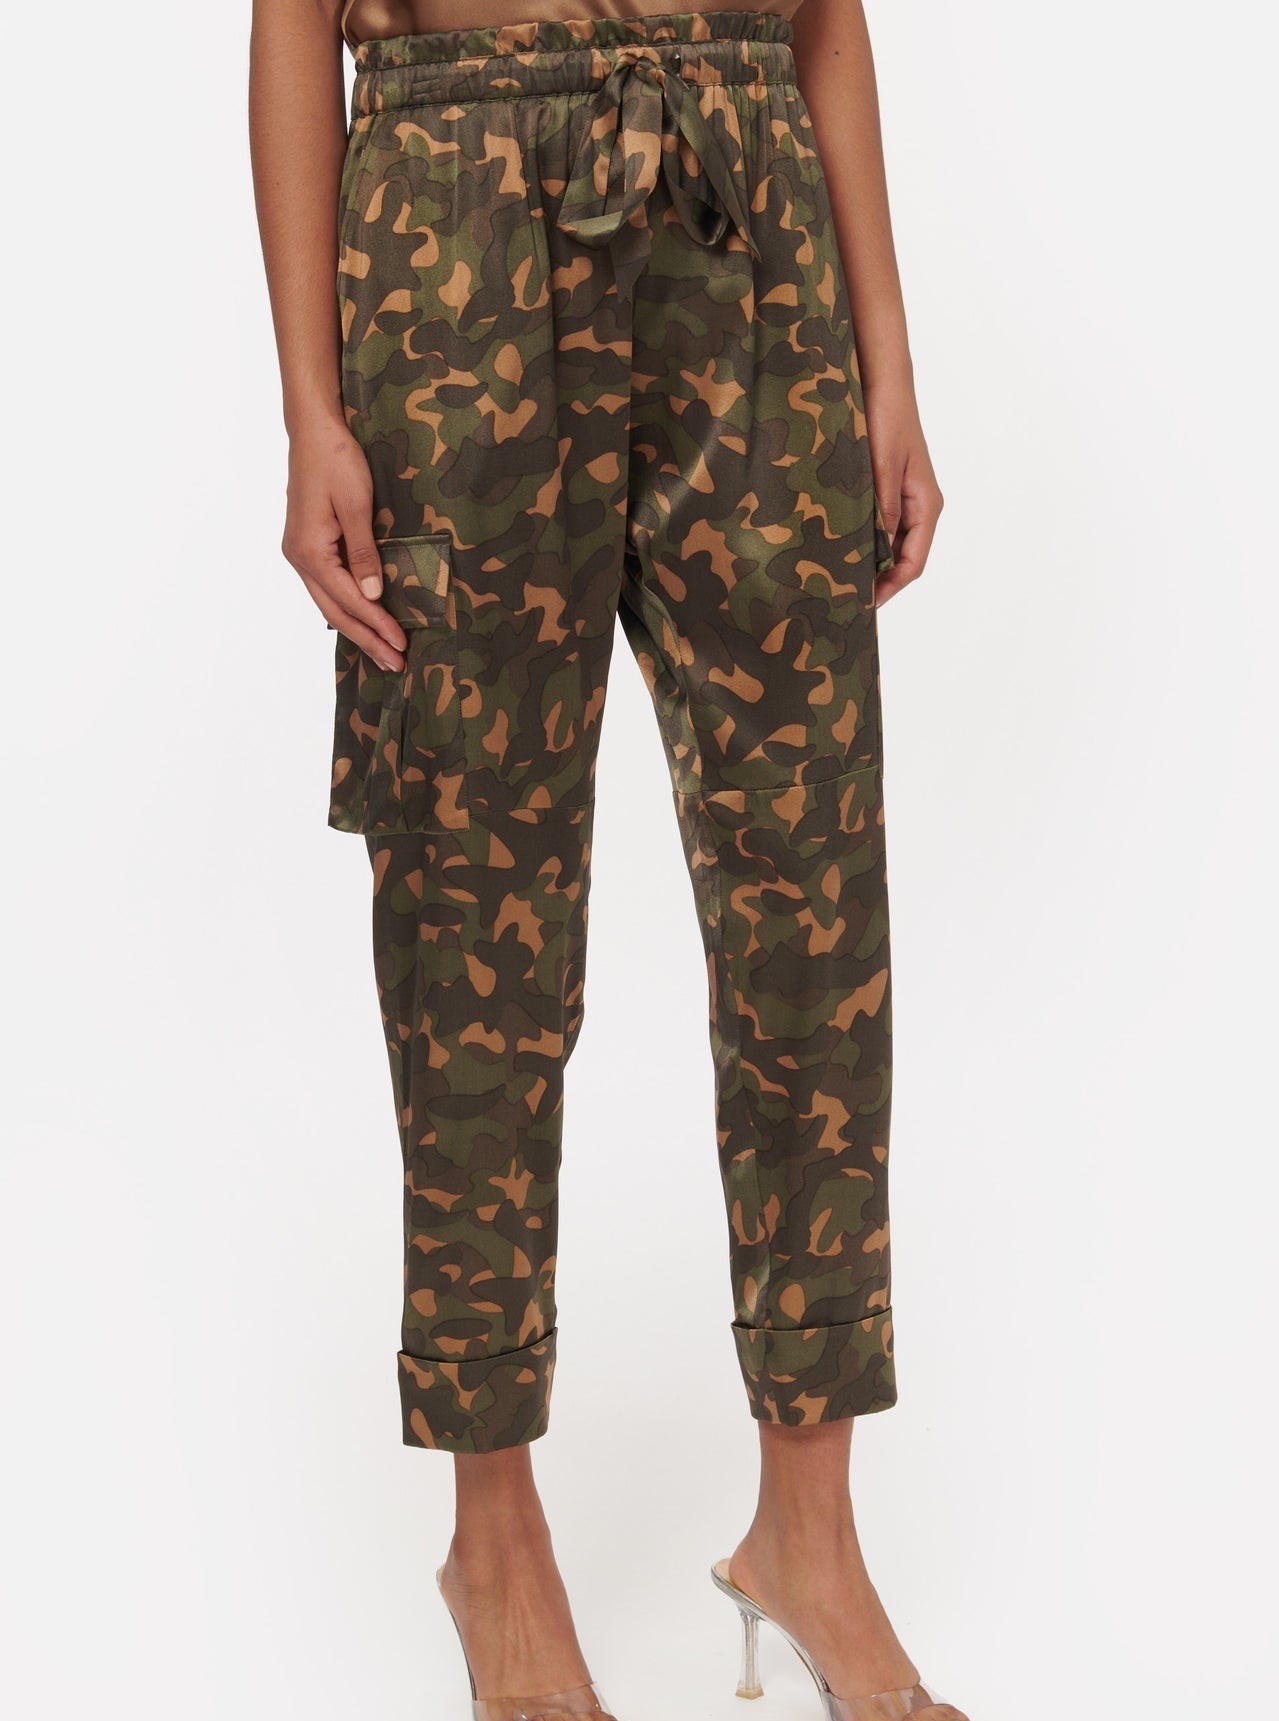 Cami NYC Carmen Cargo Pant - Size M Available